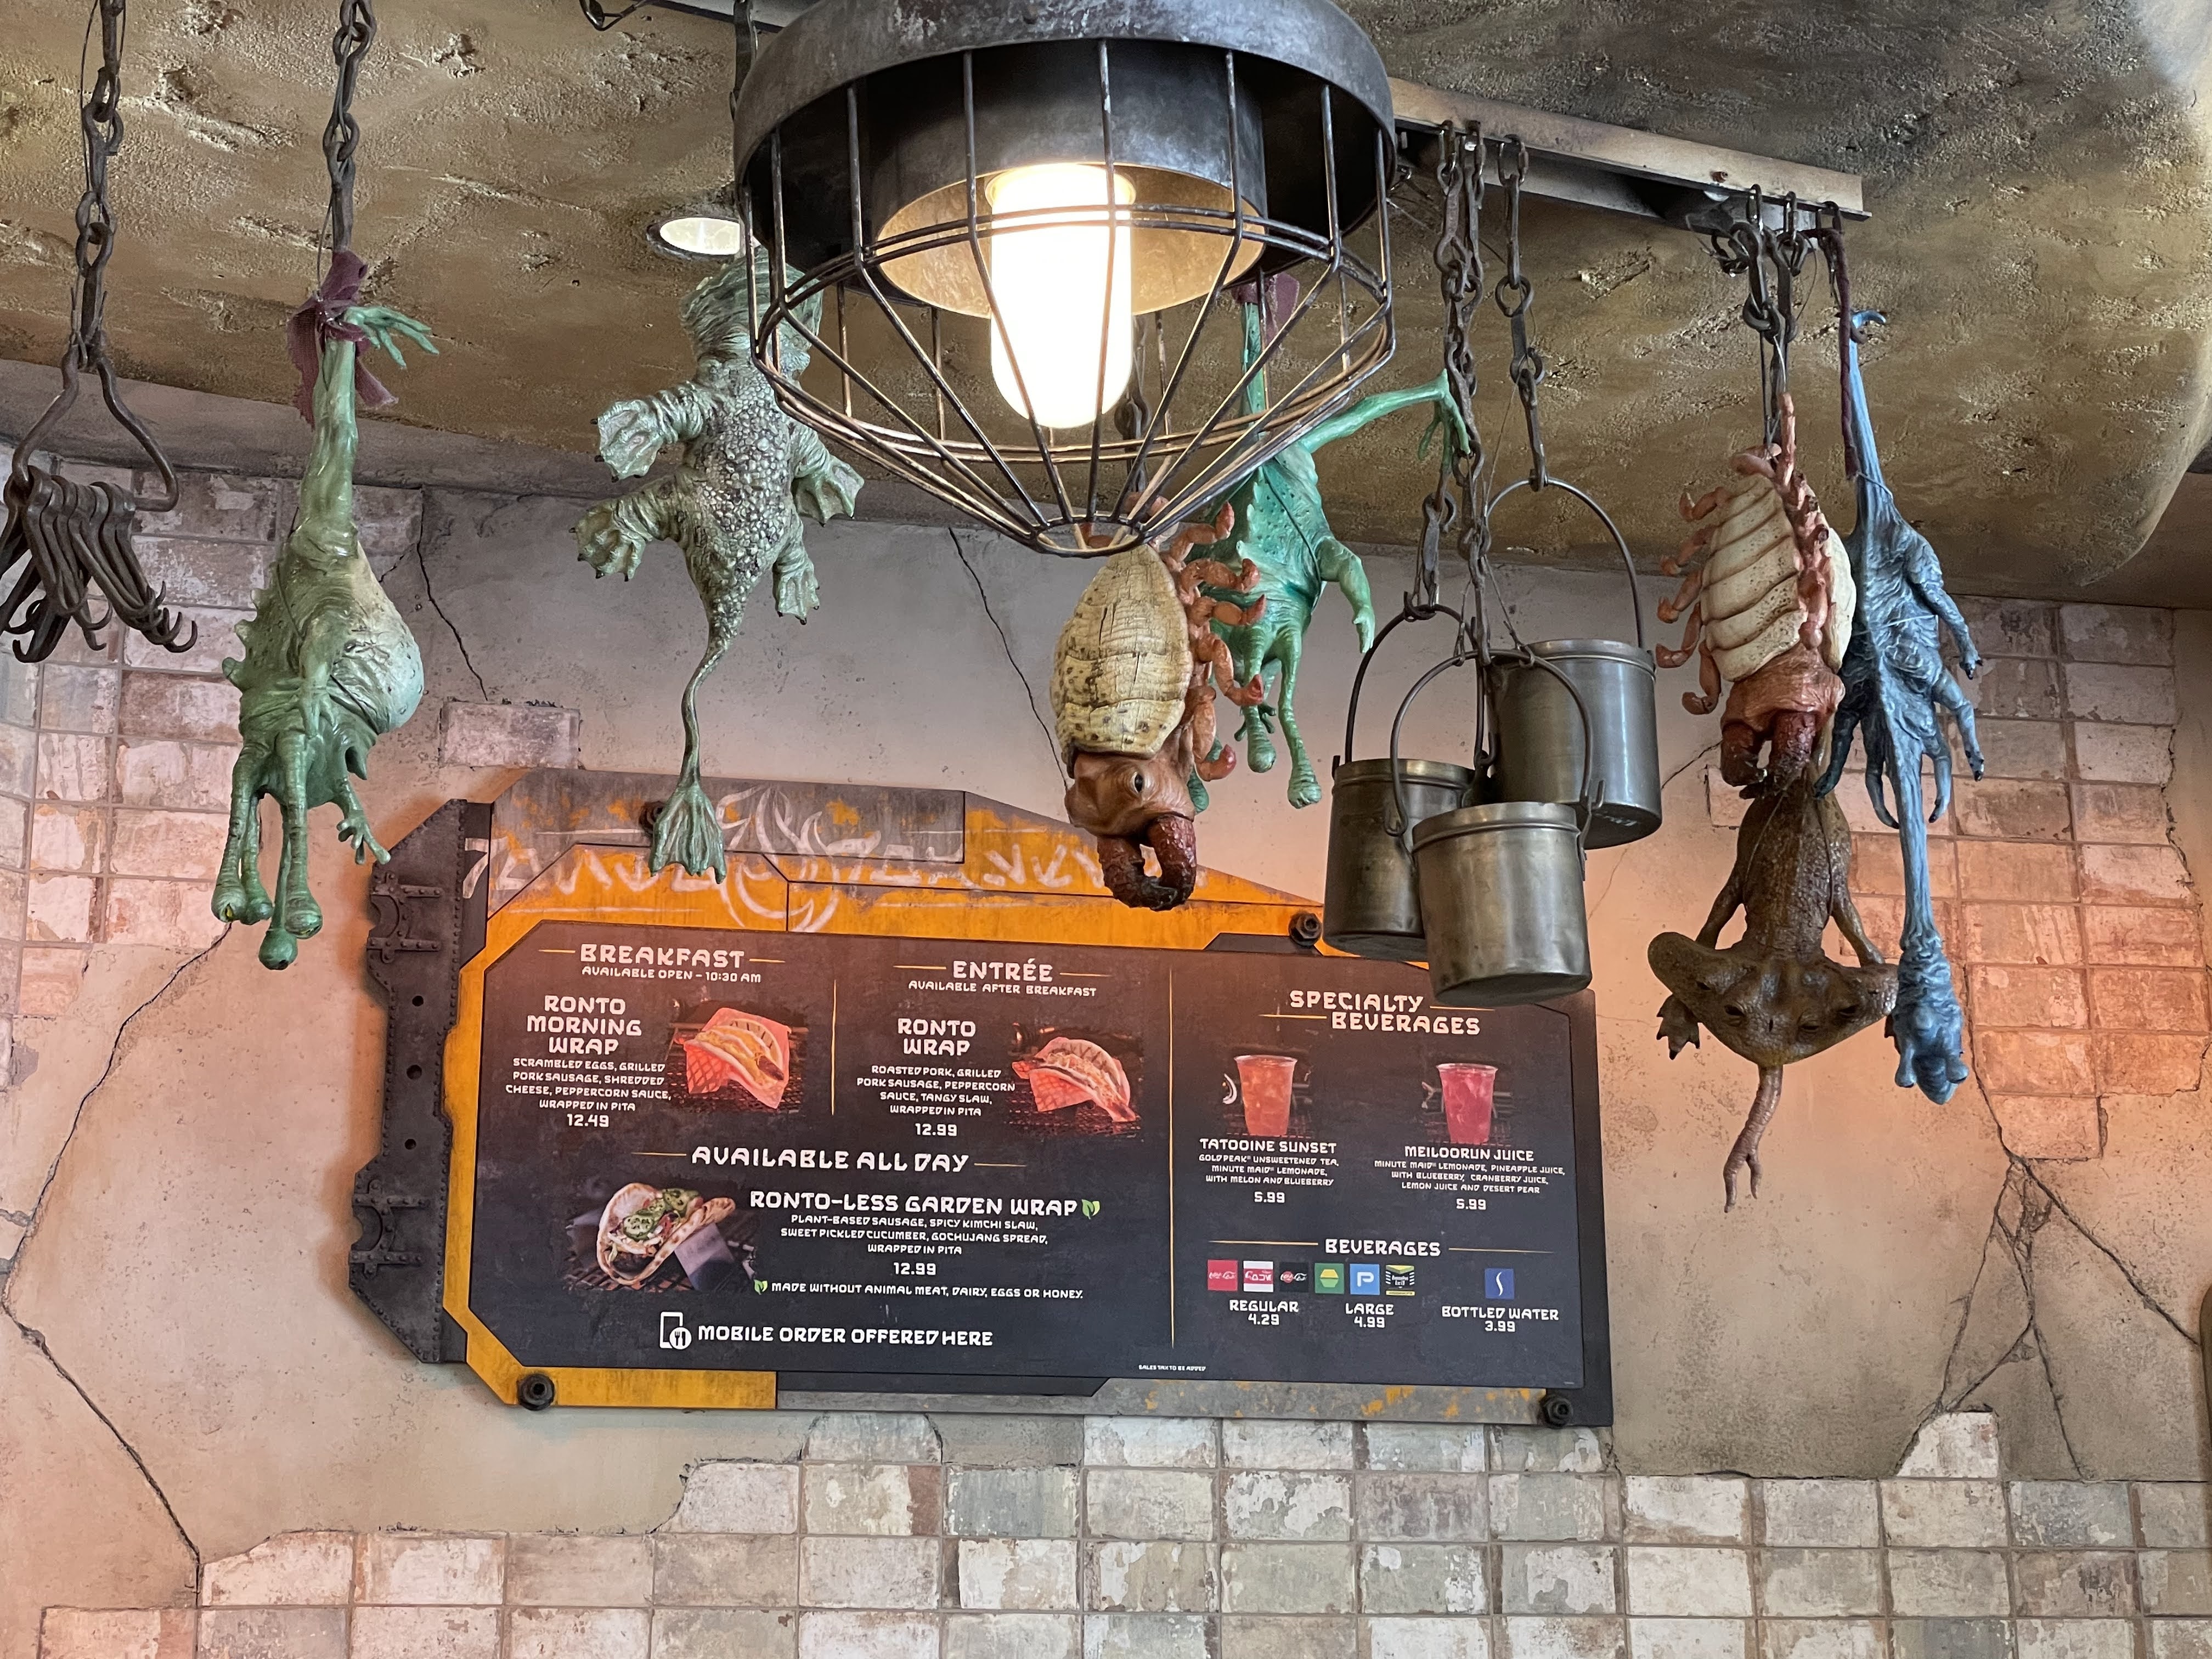 Plastic carcasses hang from the ceiling, as in a kitchen.